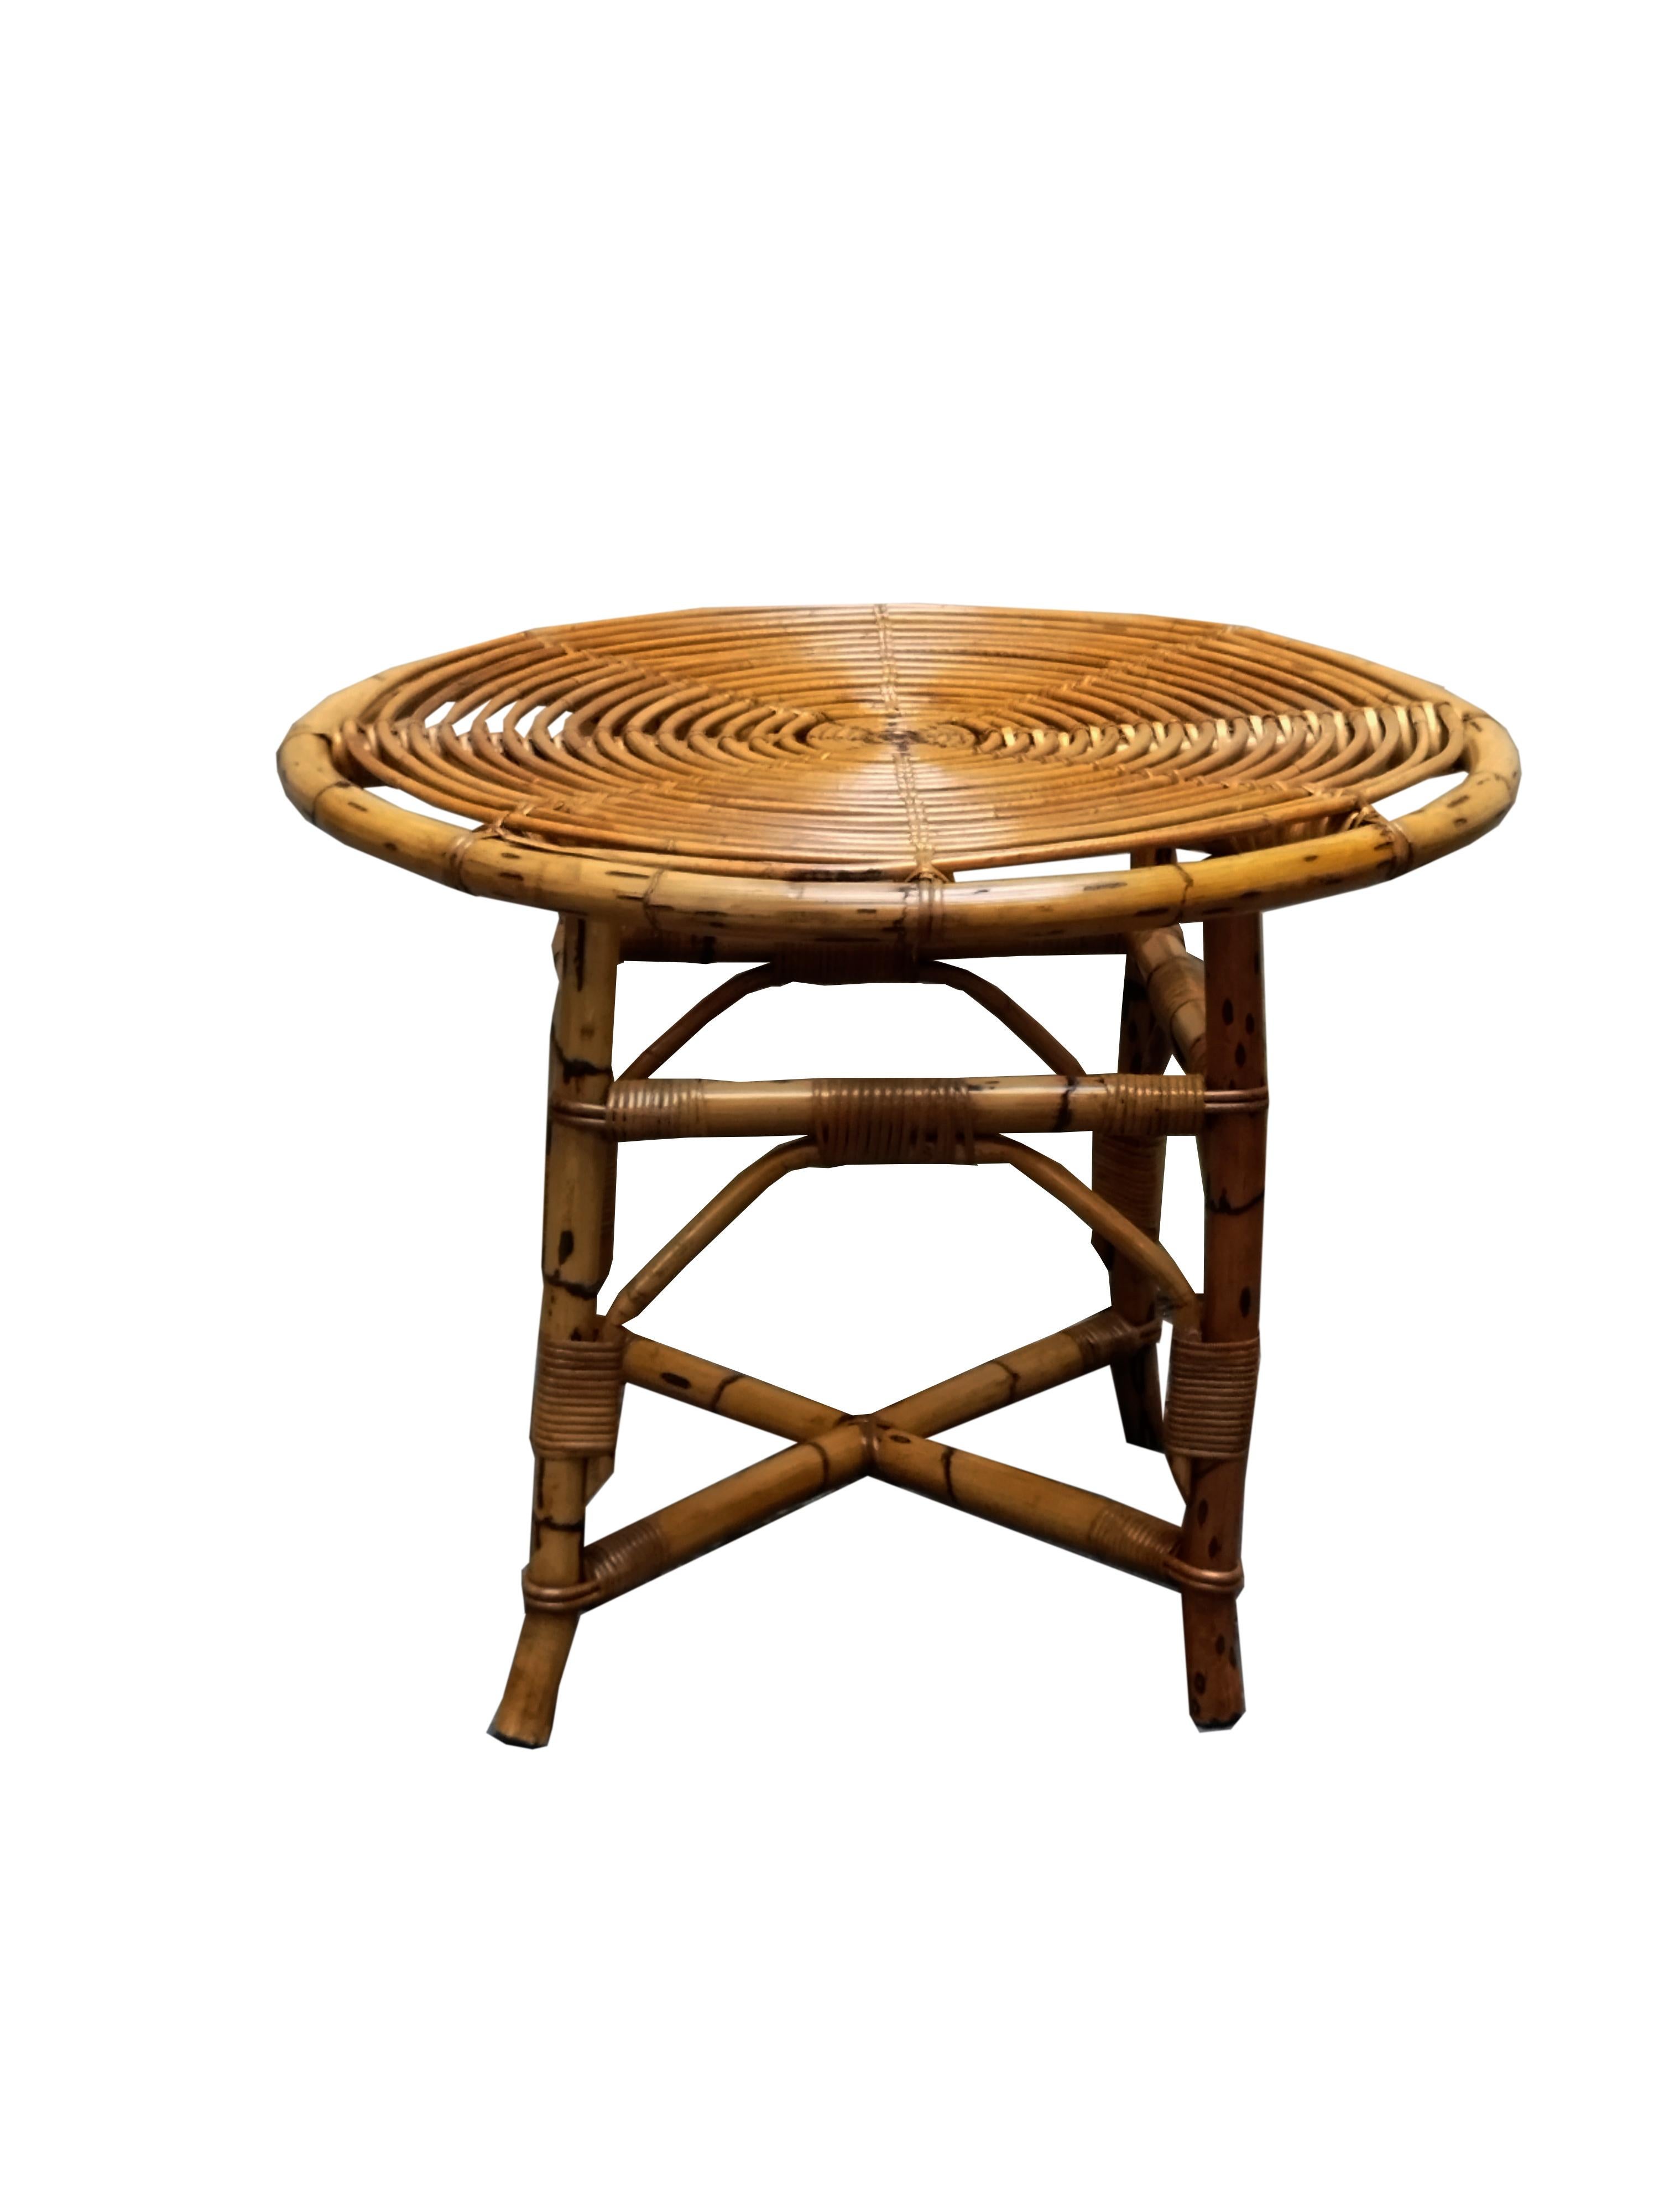 Mid-Century Modern Rattan Round Dining Table Set with 4 Matching Chairs, Italy 1960s For Sale